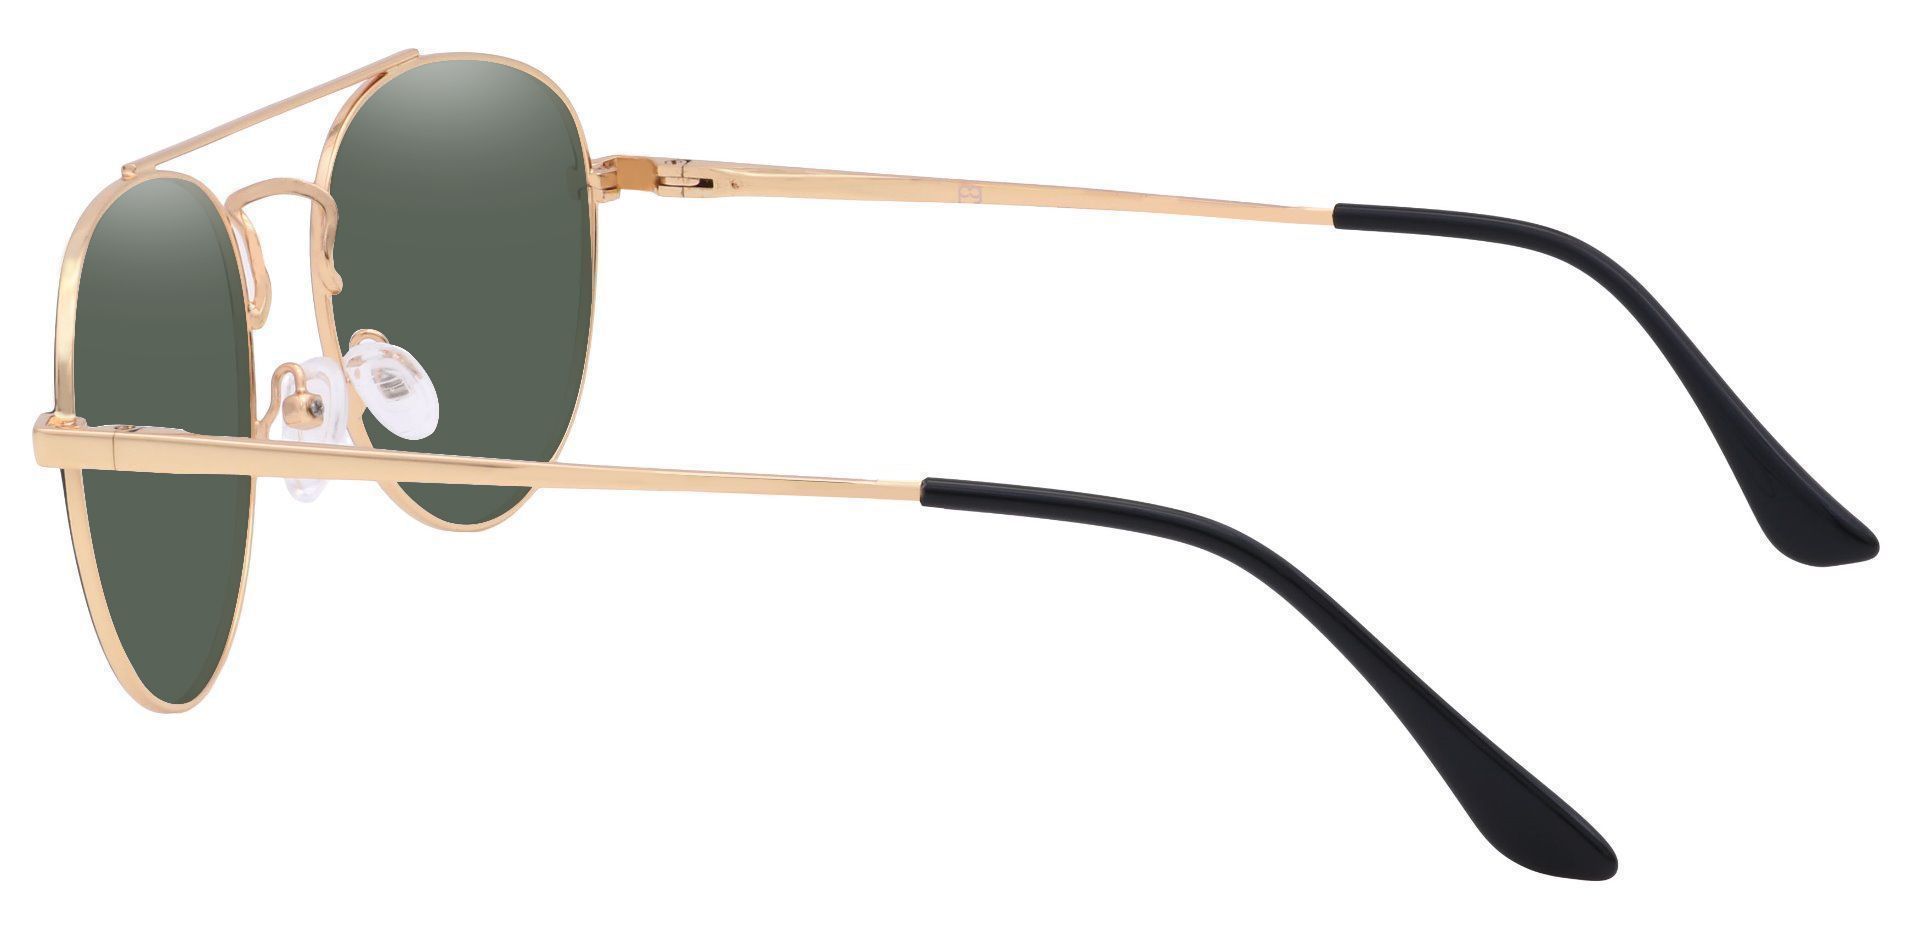 Trapp Aviator Reading Sunglasses - Gold Frame With Green Lenses